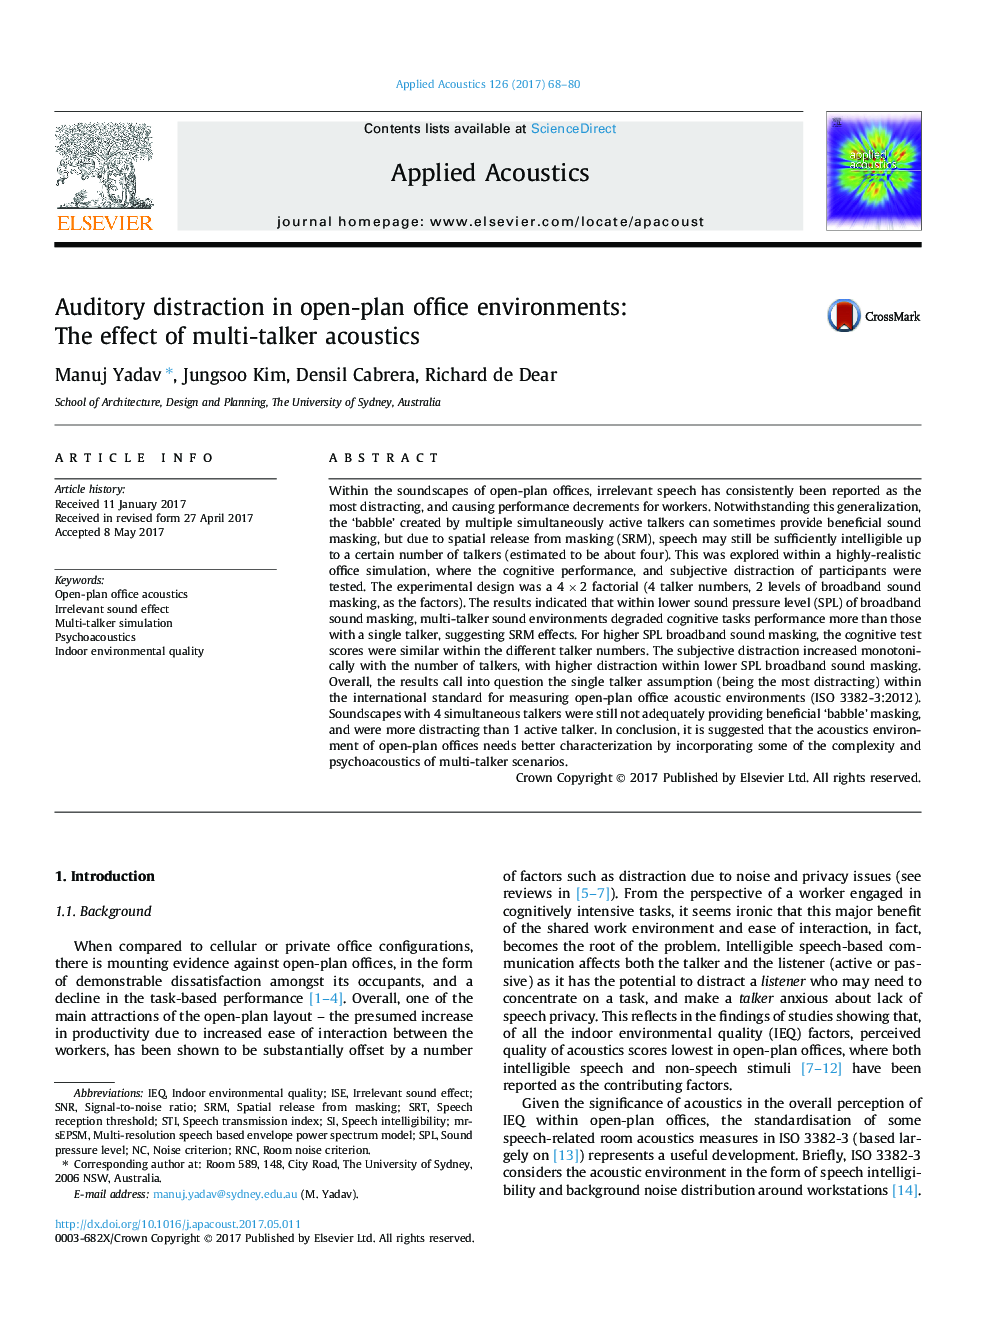 Auditory distraction in open-plan office environments: The effect of multi-talker acoustics